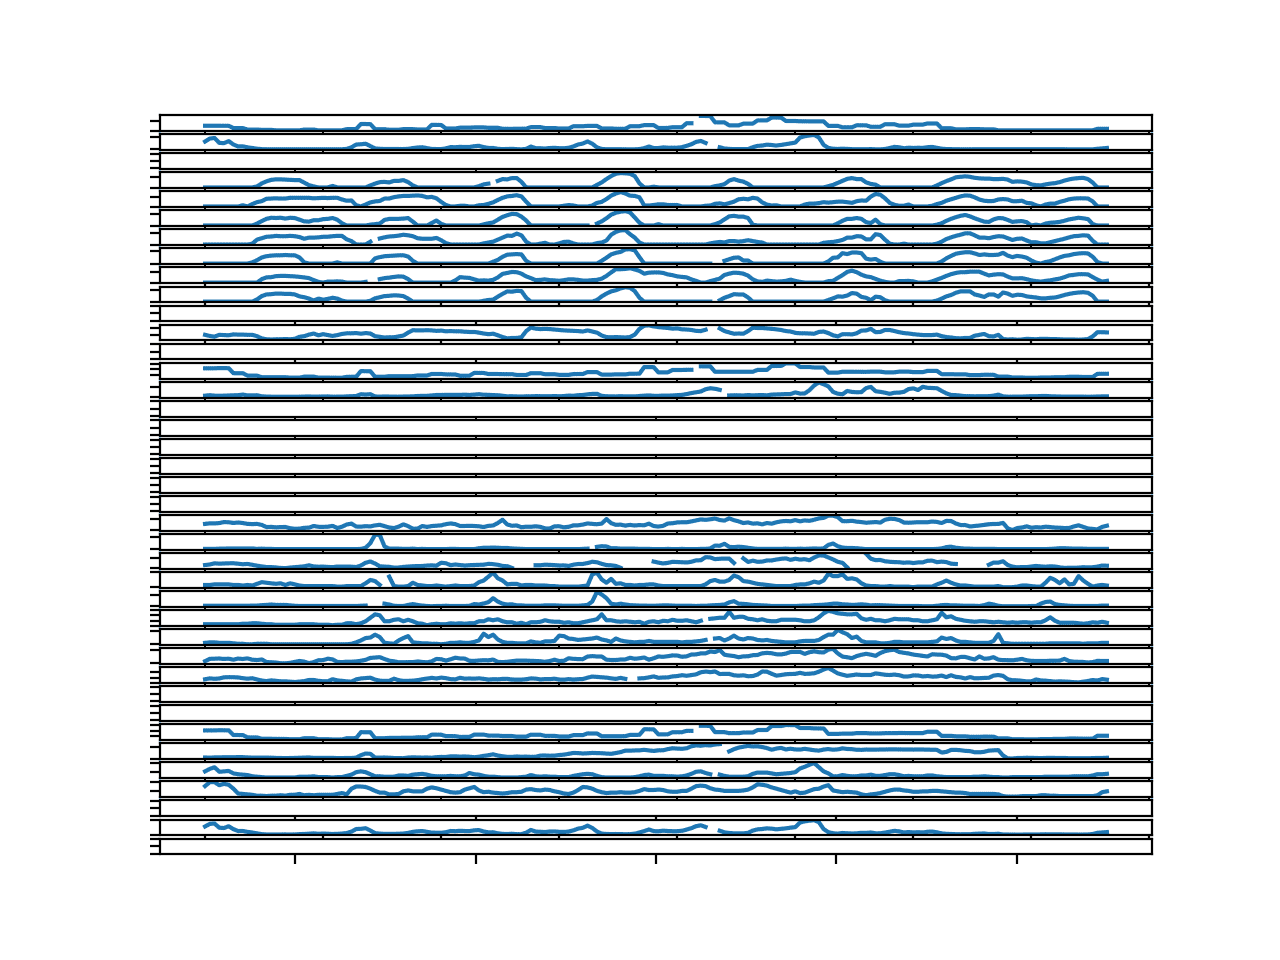 Parallel Time Series Line Plots For All Target Variables for 1 Chunk